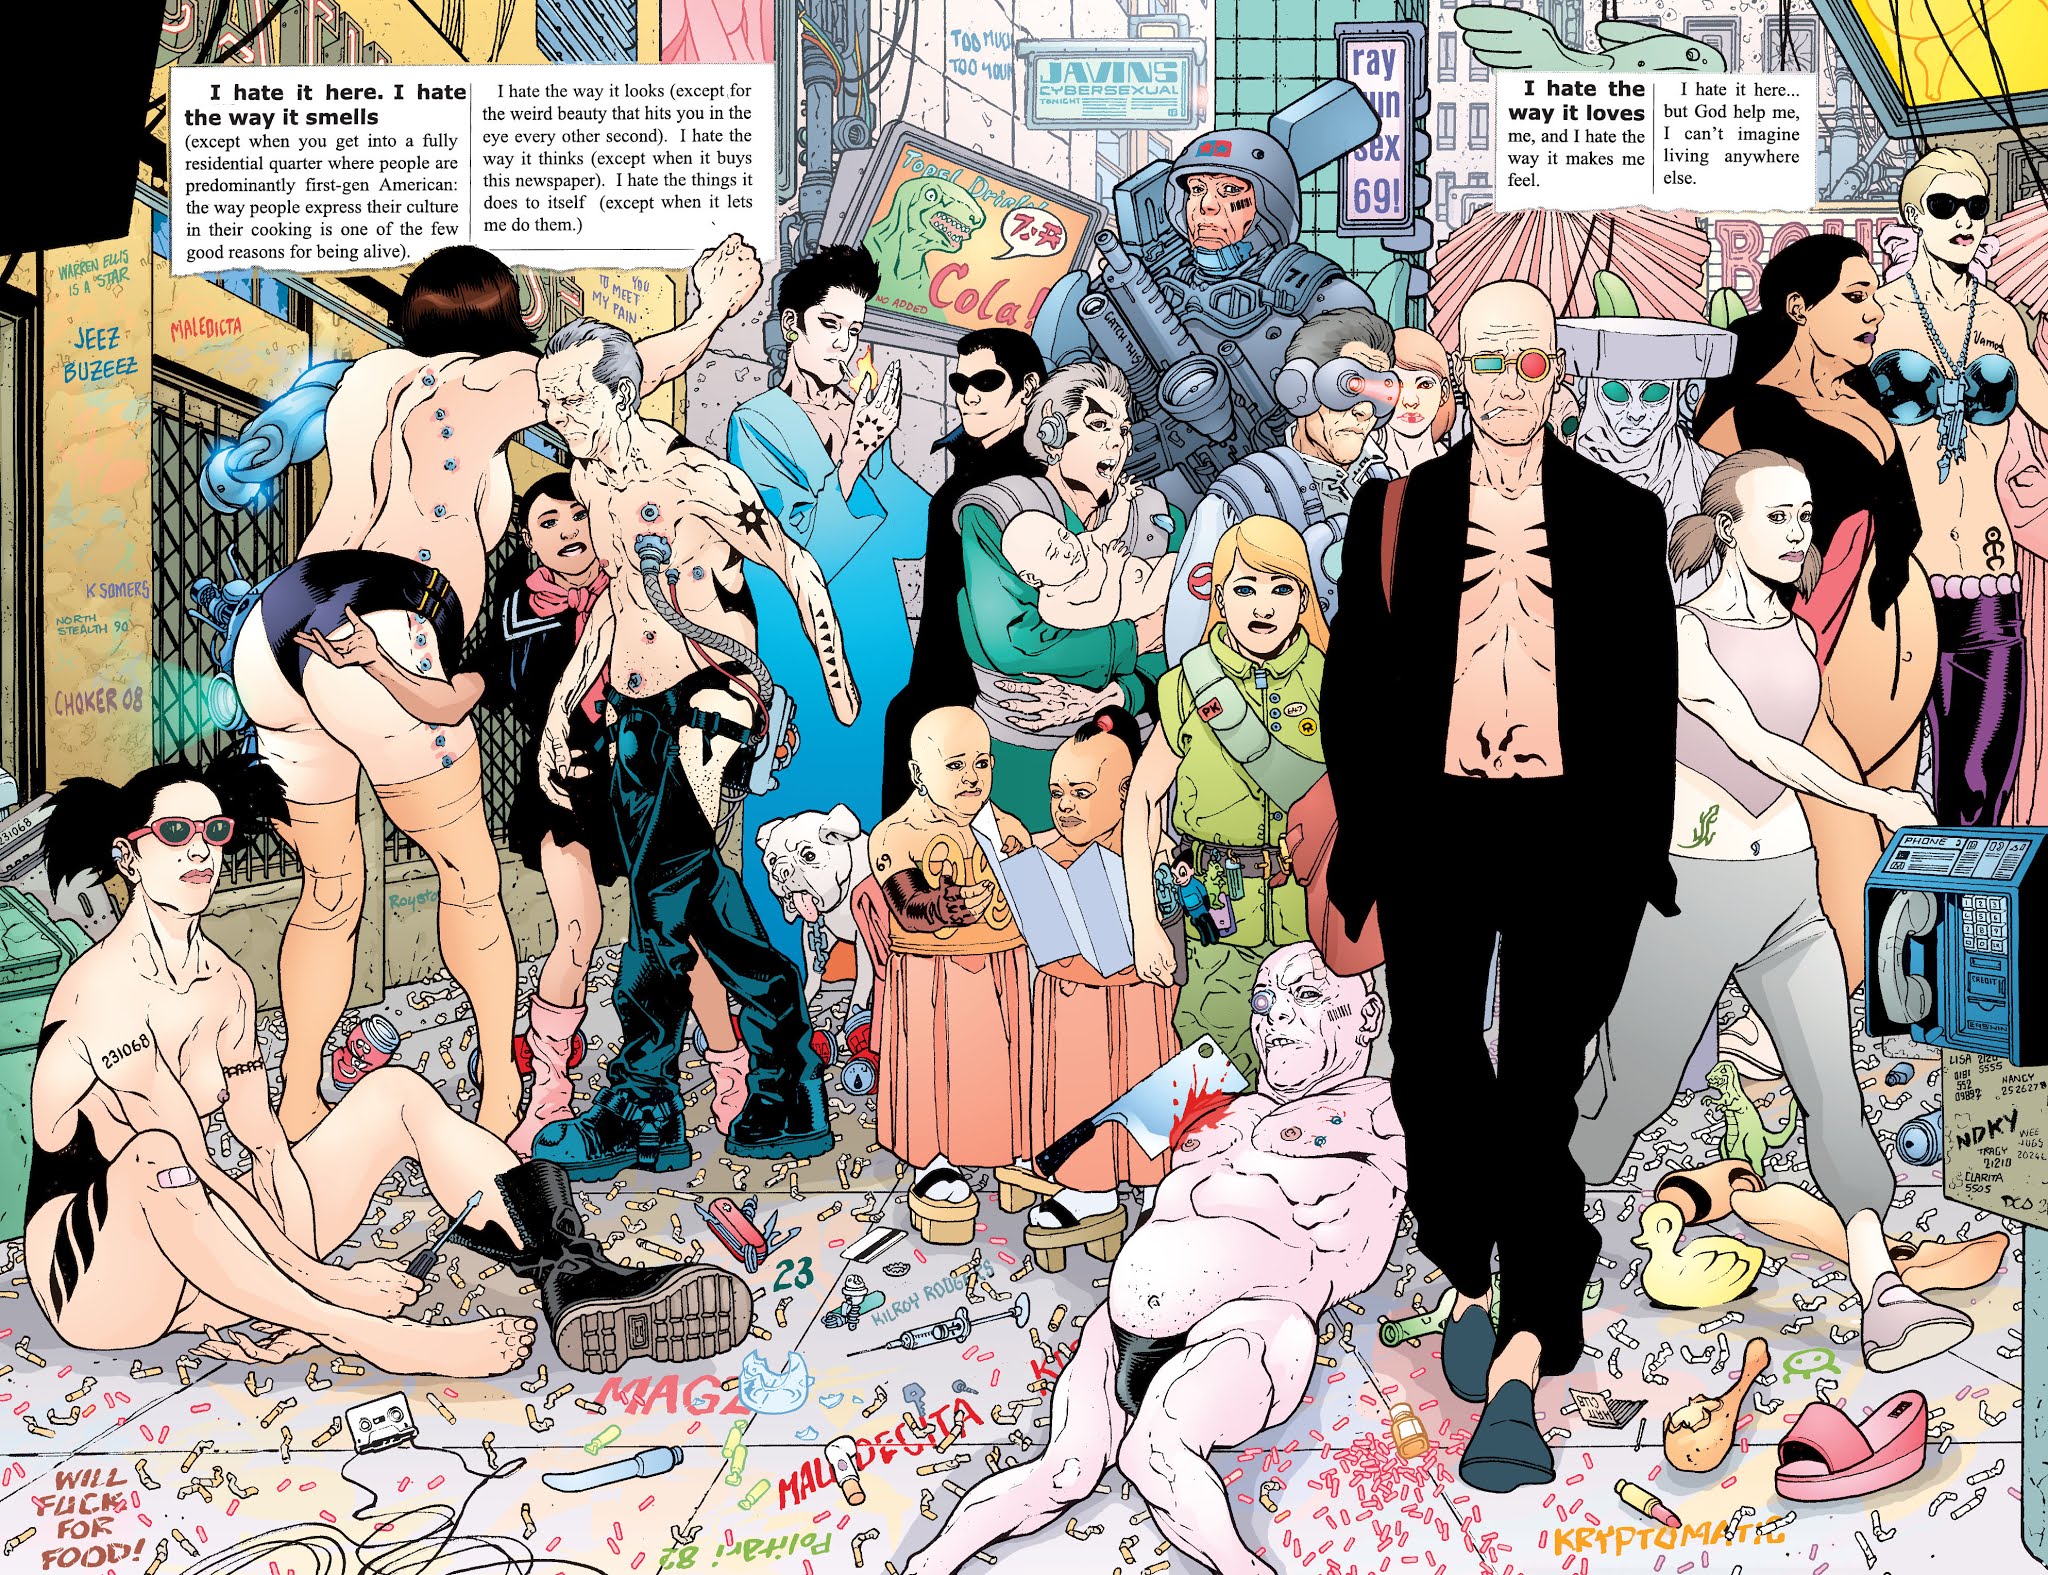 Read online Transmetropolitan comic -  Issue # Issue I Hate It Here - 10